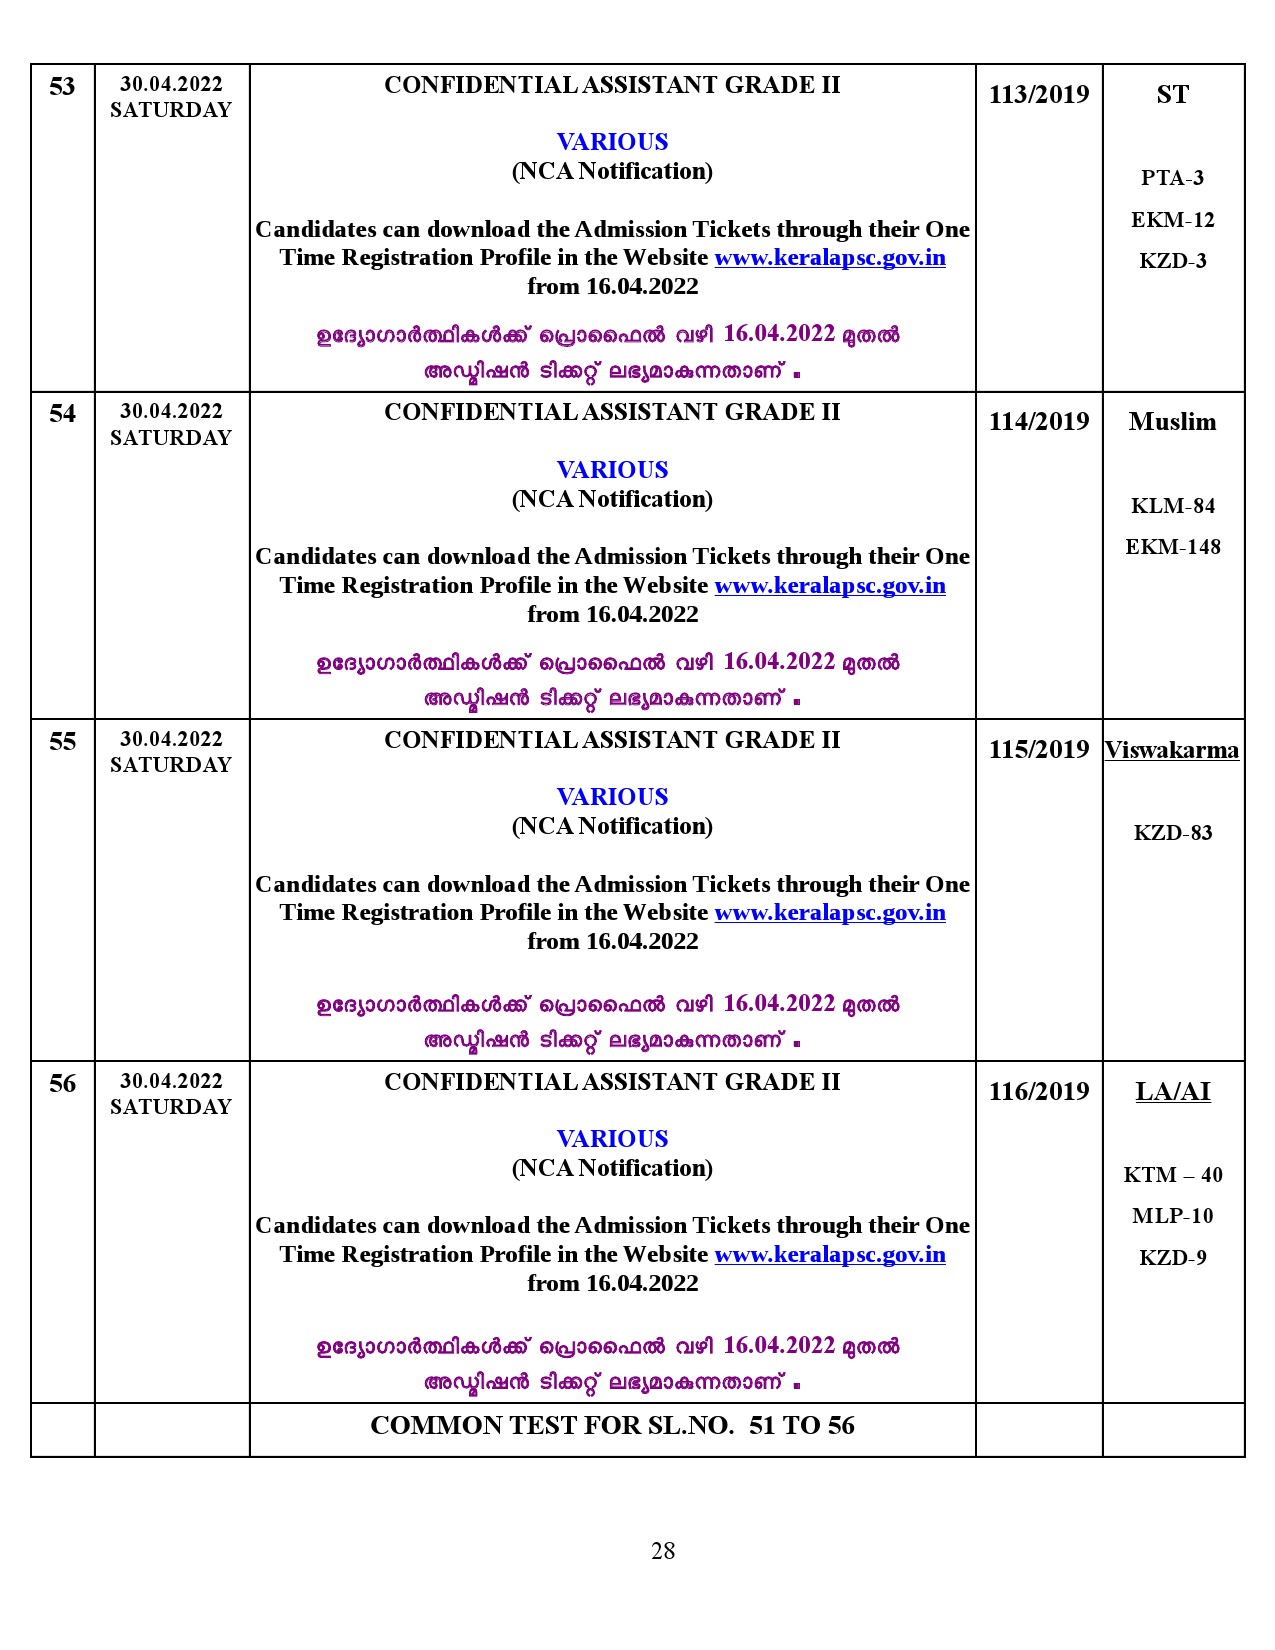 Examination Programme For The Month Of April 2022 - Notification Image 28